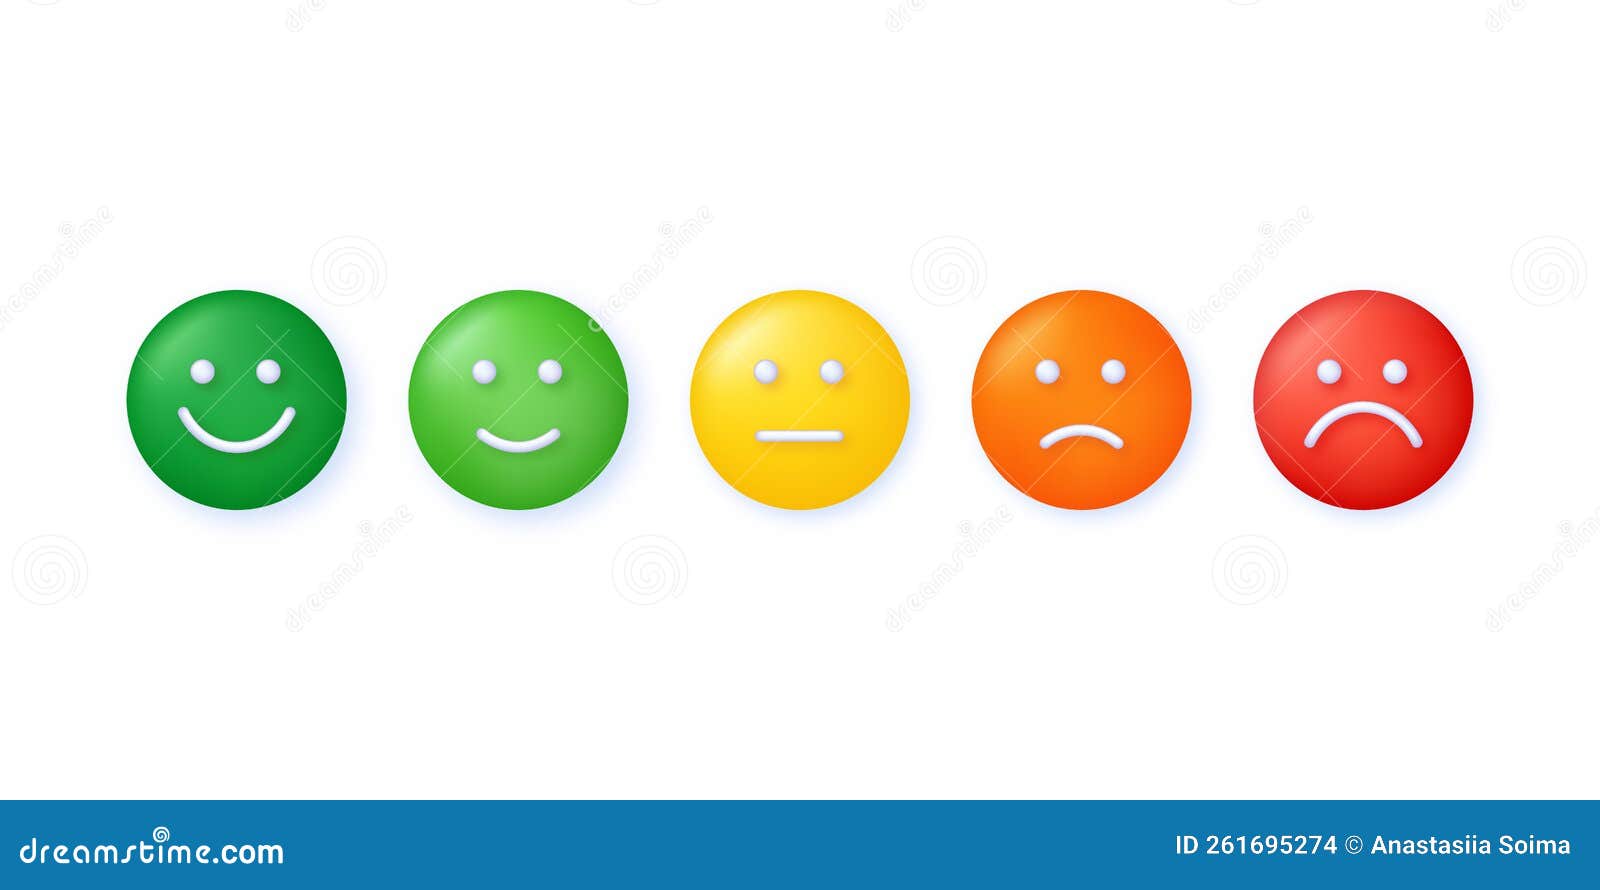 3D Feedback Emotion Scale Illustration. Reviews with Good and Bad ...